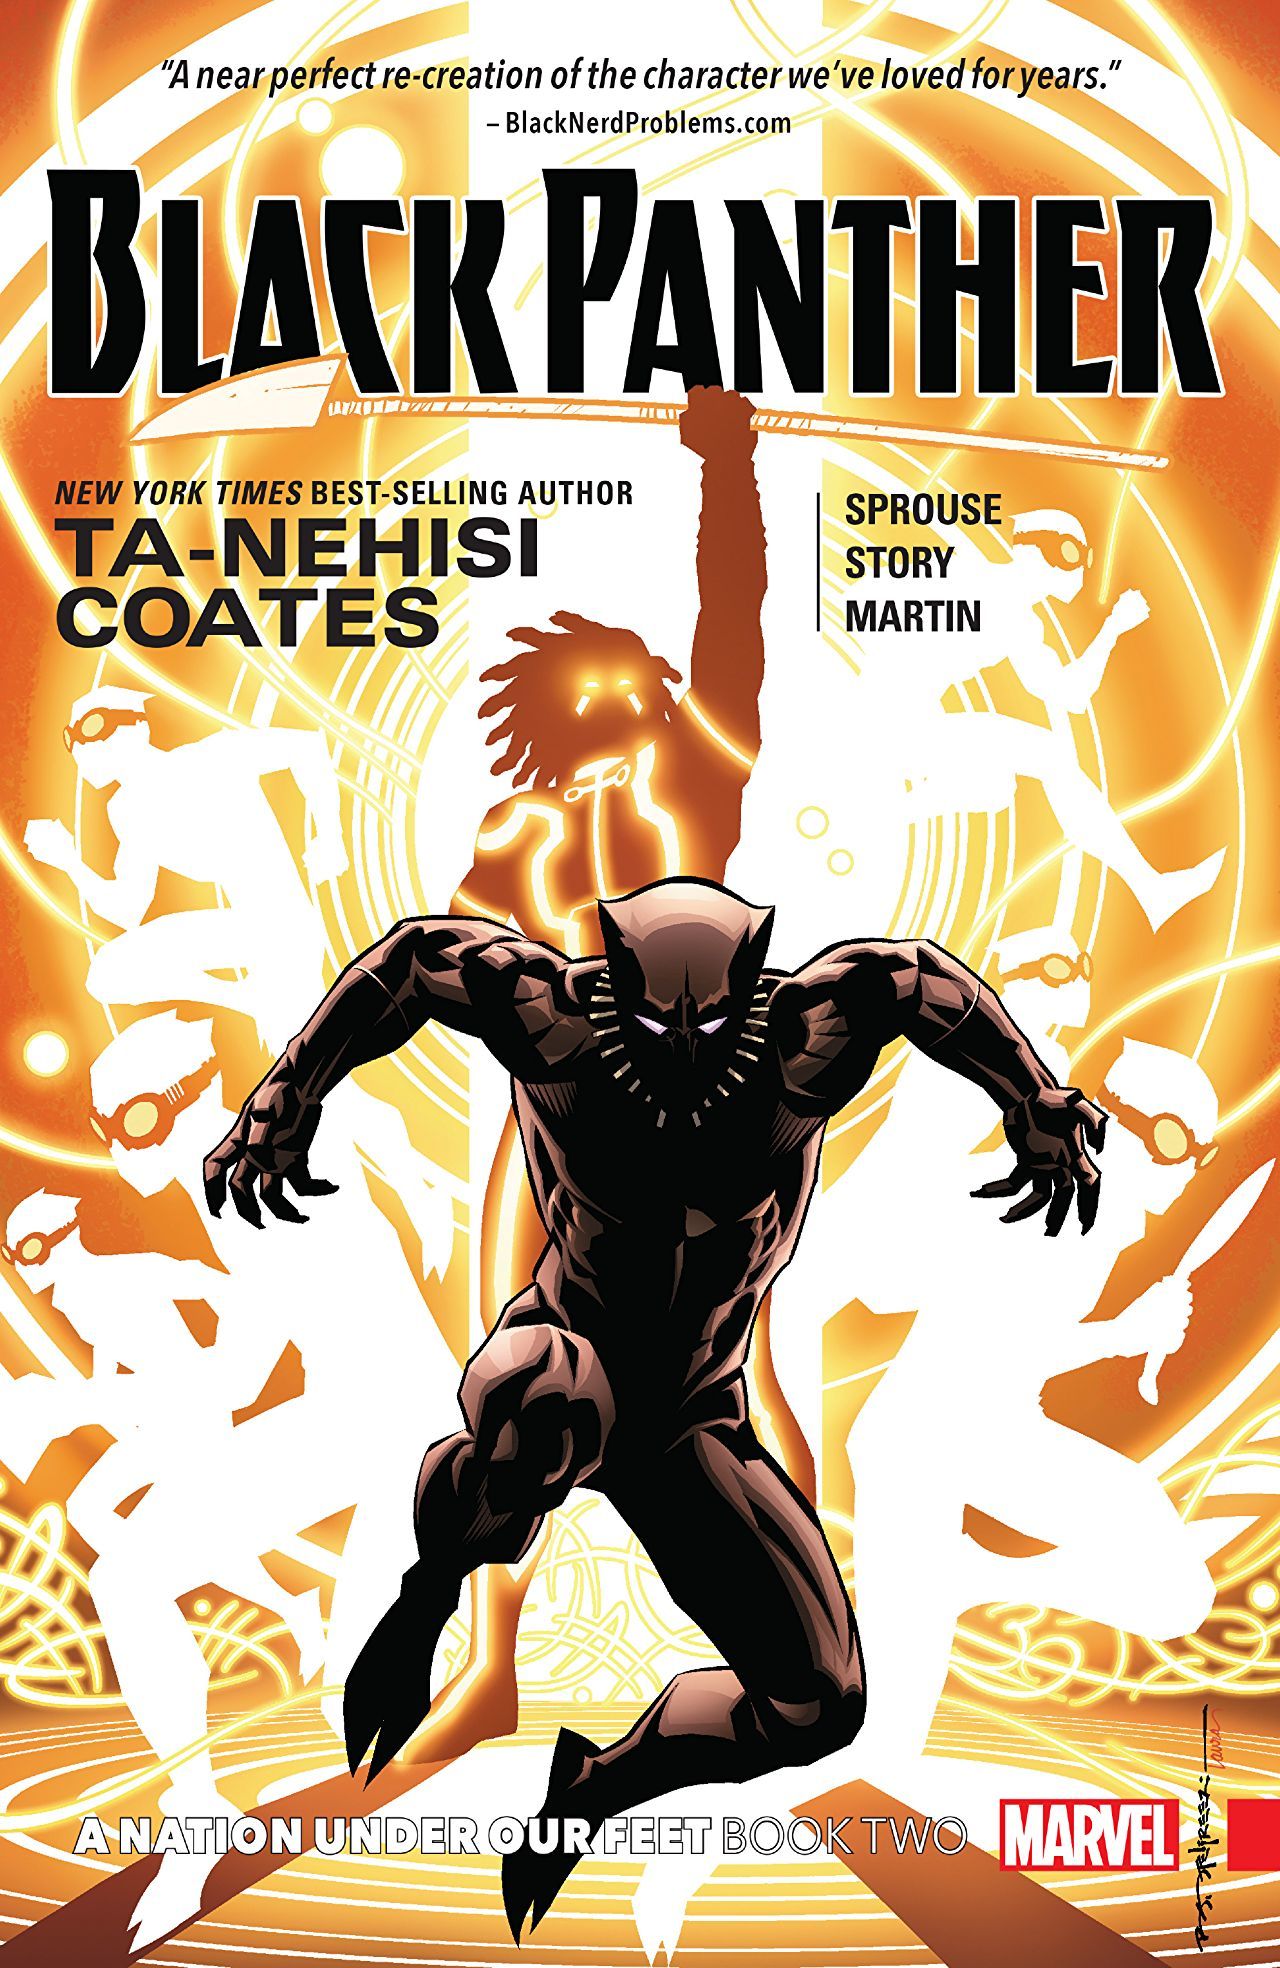 Black Panther, Vol. 2: A Nation Under Our Feet by Ta-Nehisi Coates